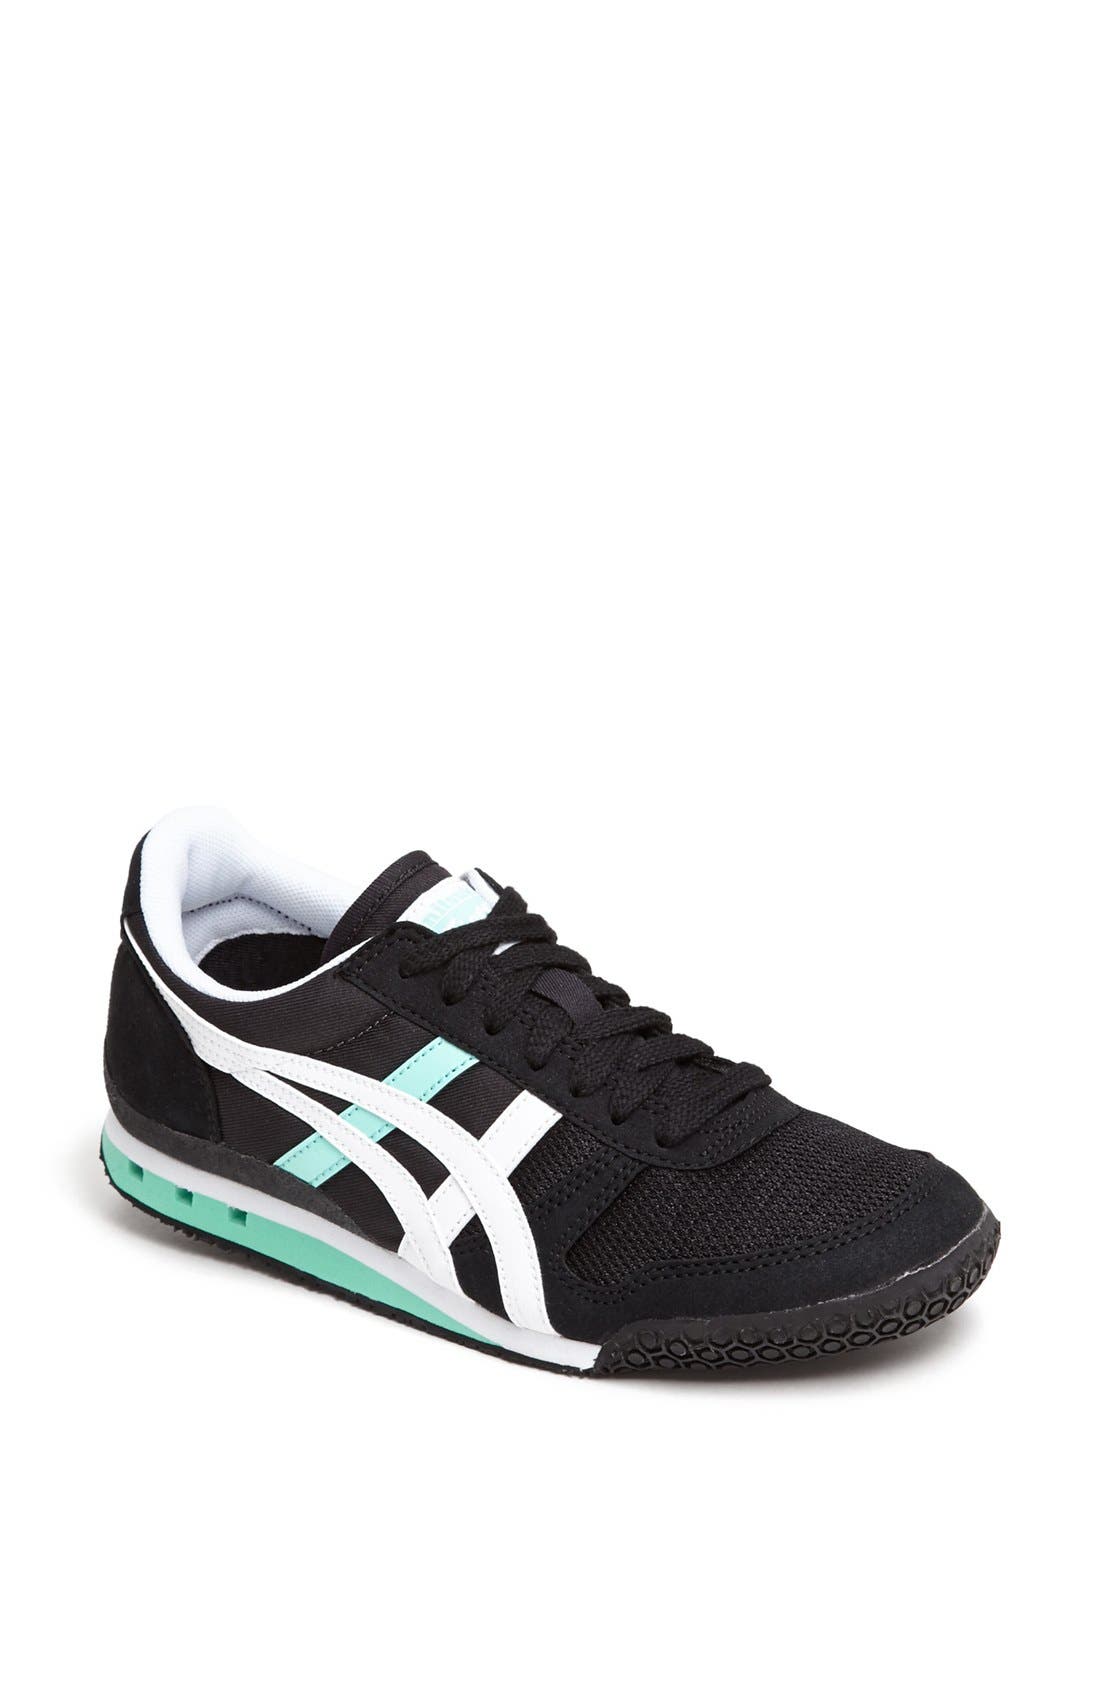 womens onitsuka tiger ultimate 81 athletic shoe